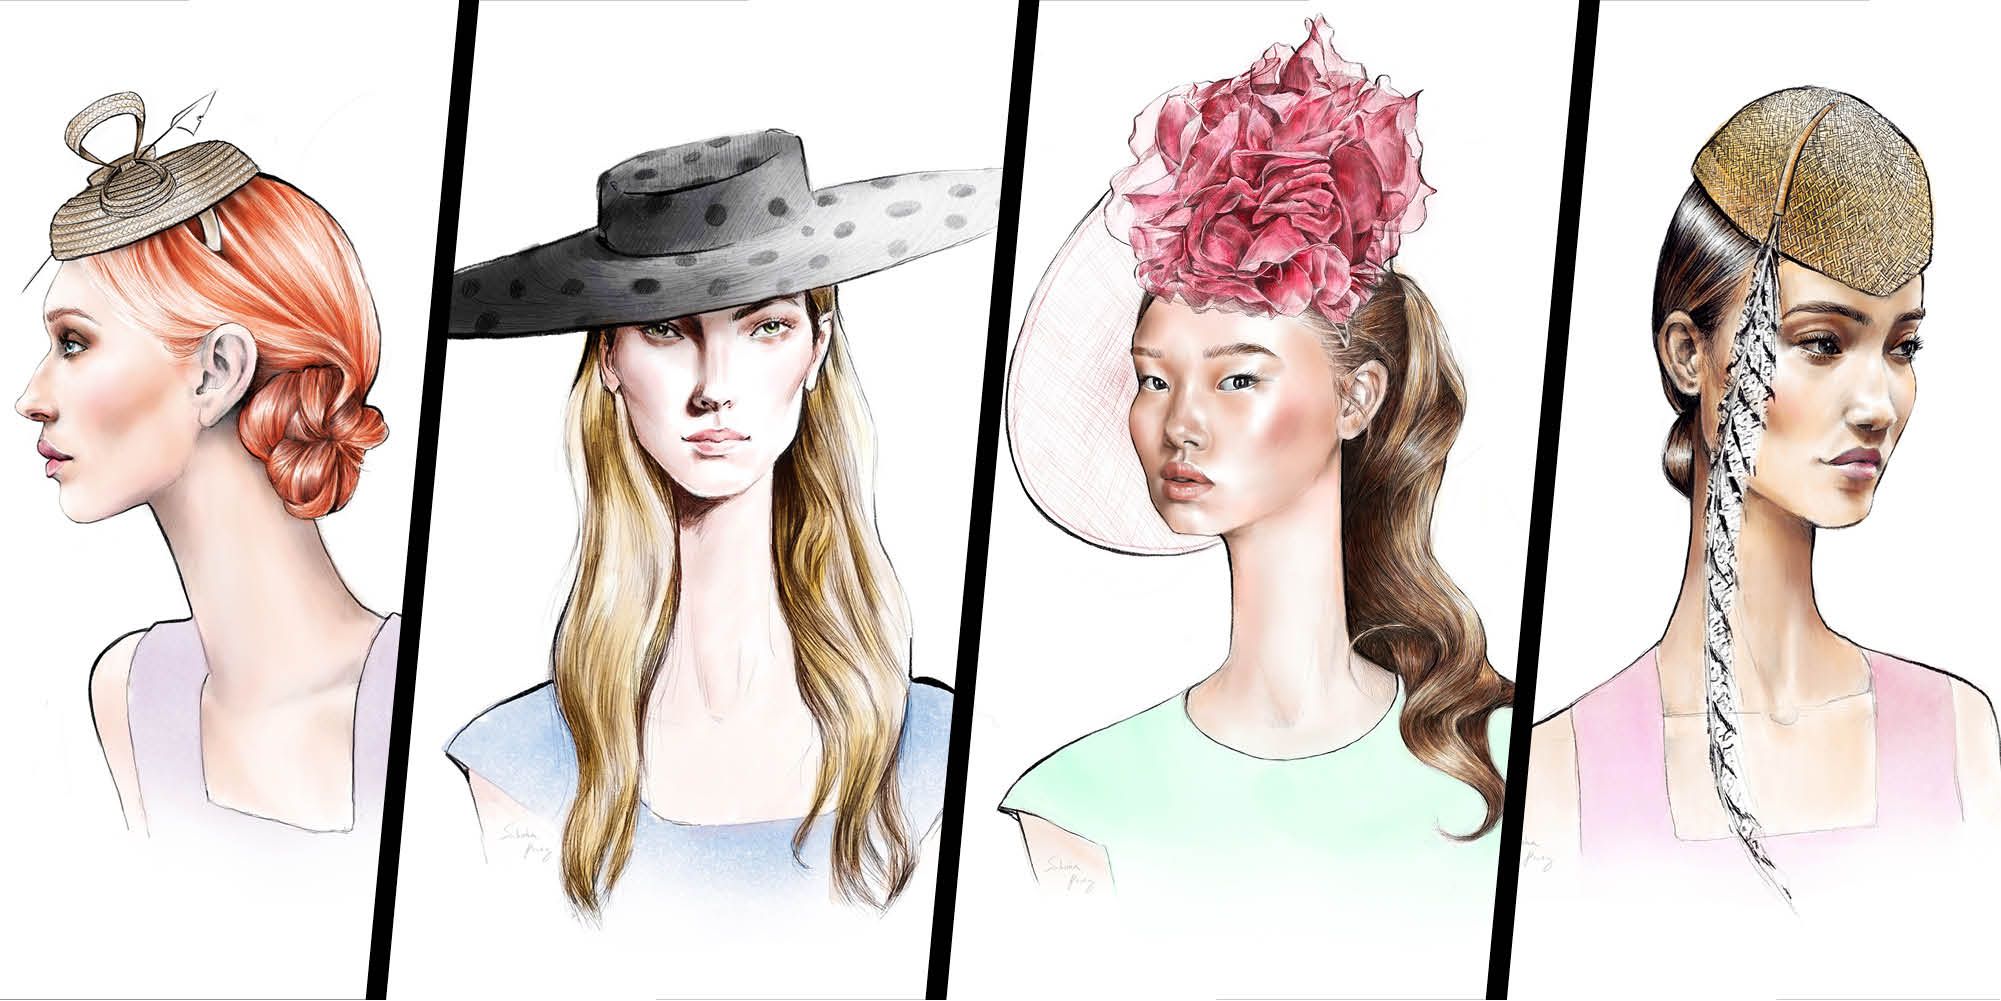 Royal Ascot 2019: How to match your hair to your hat